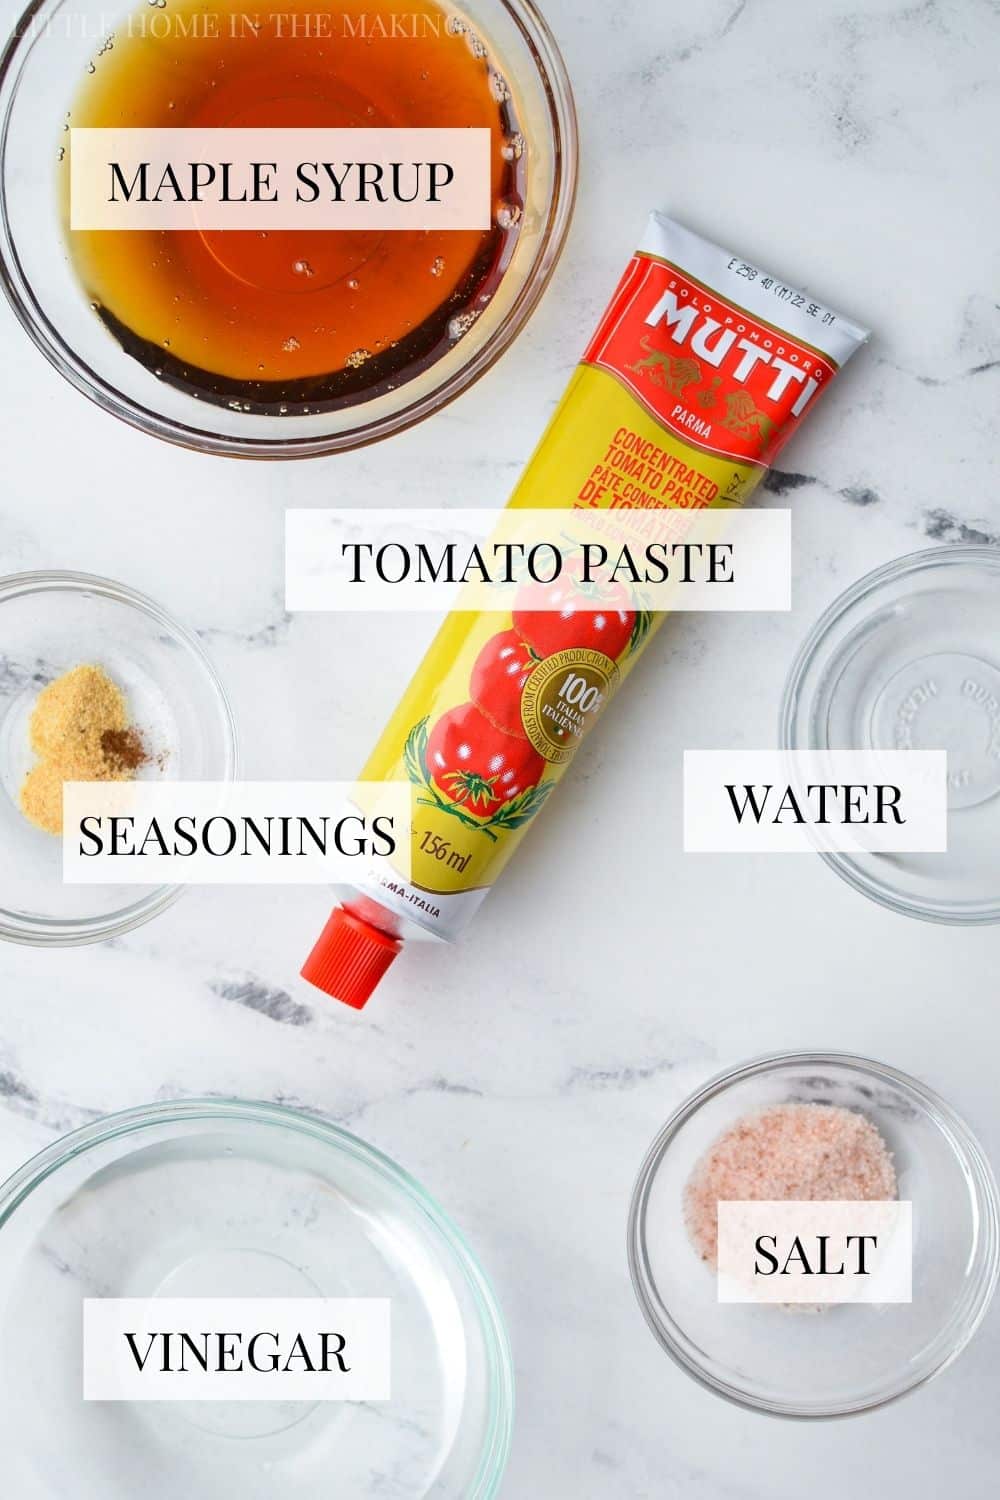 The ingredients needed to make a healthy homemade ketchup